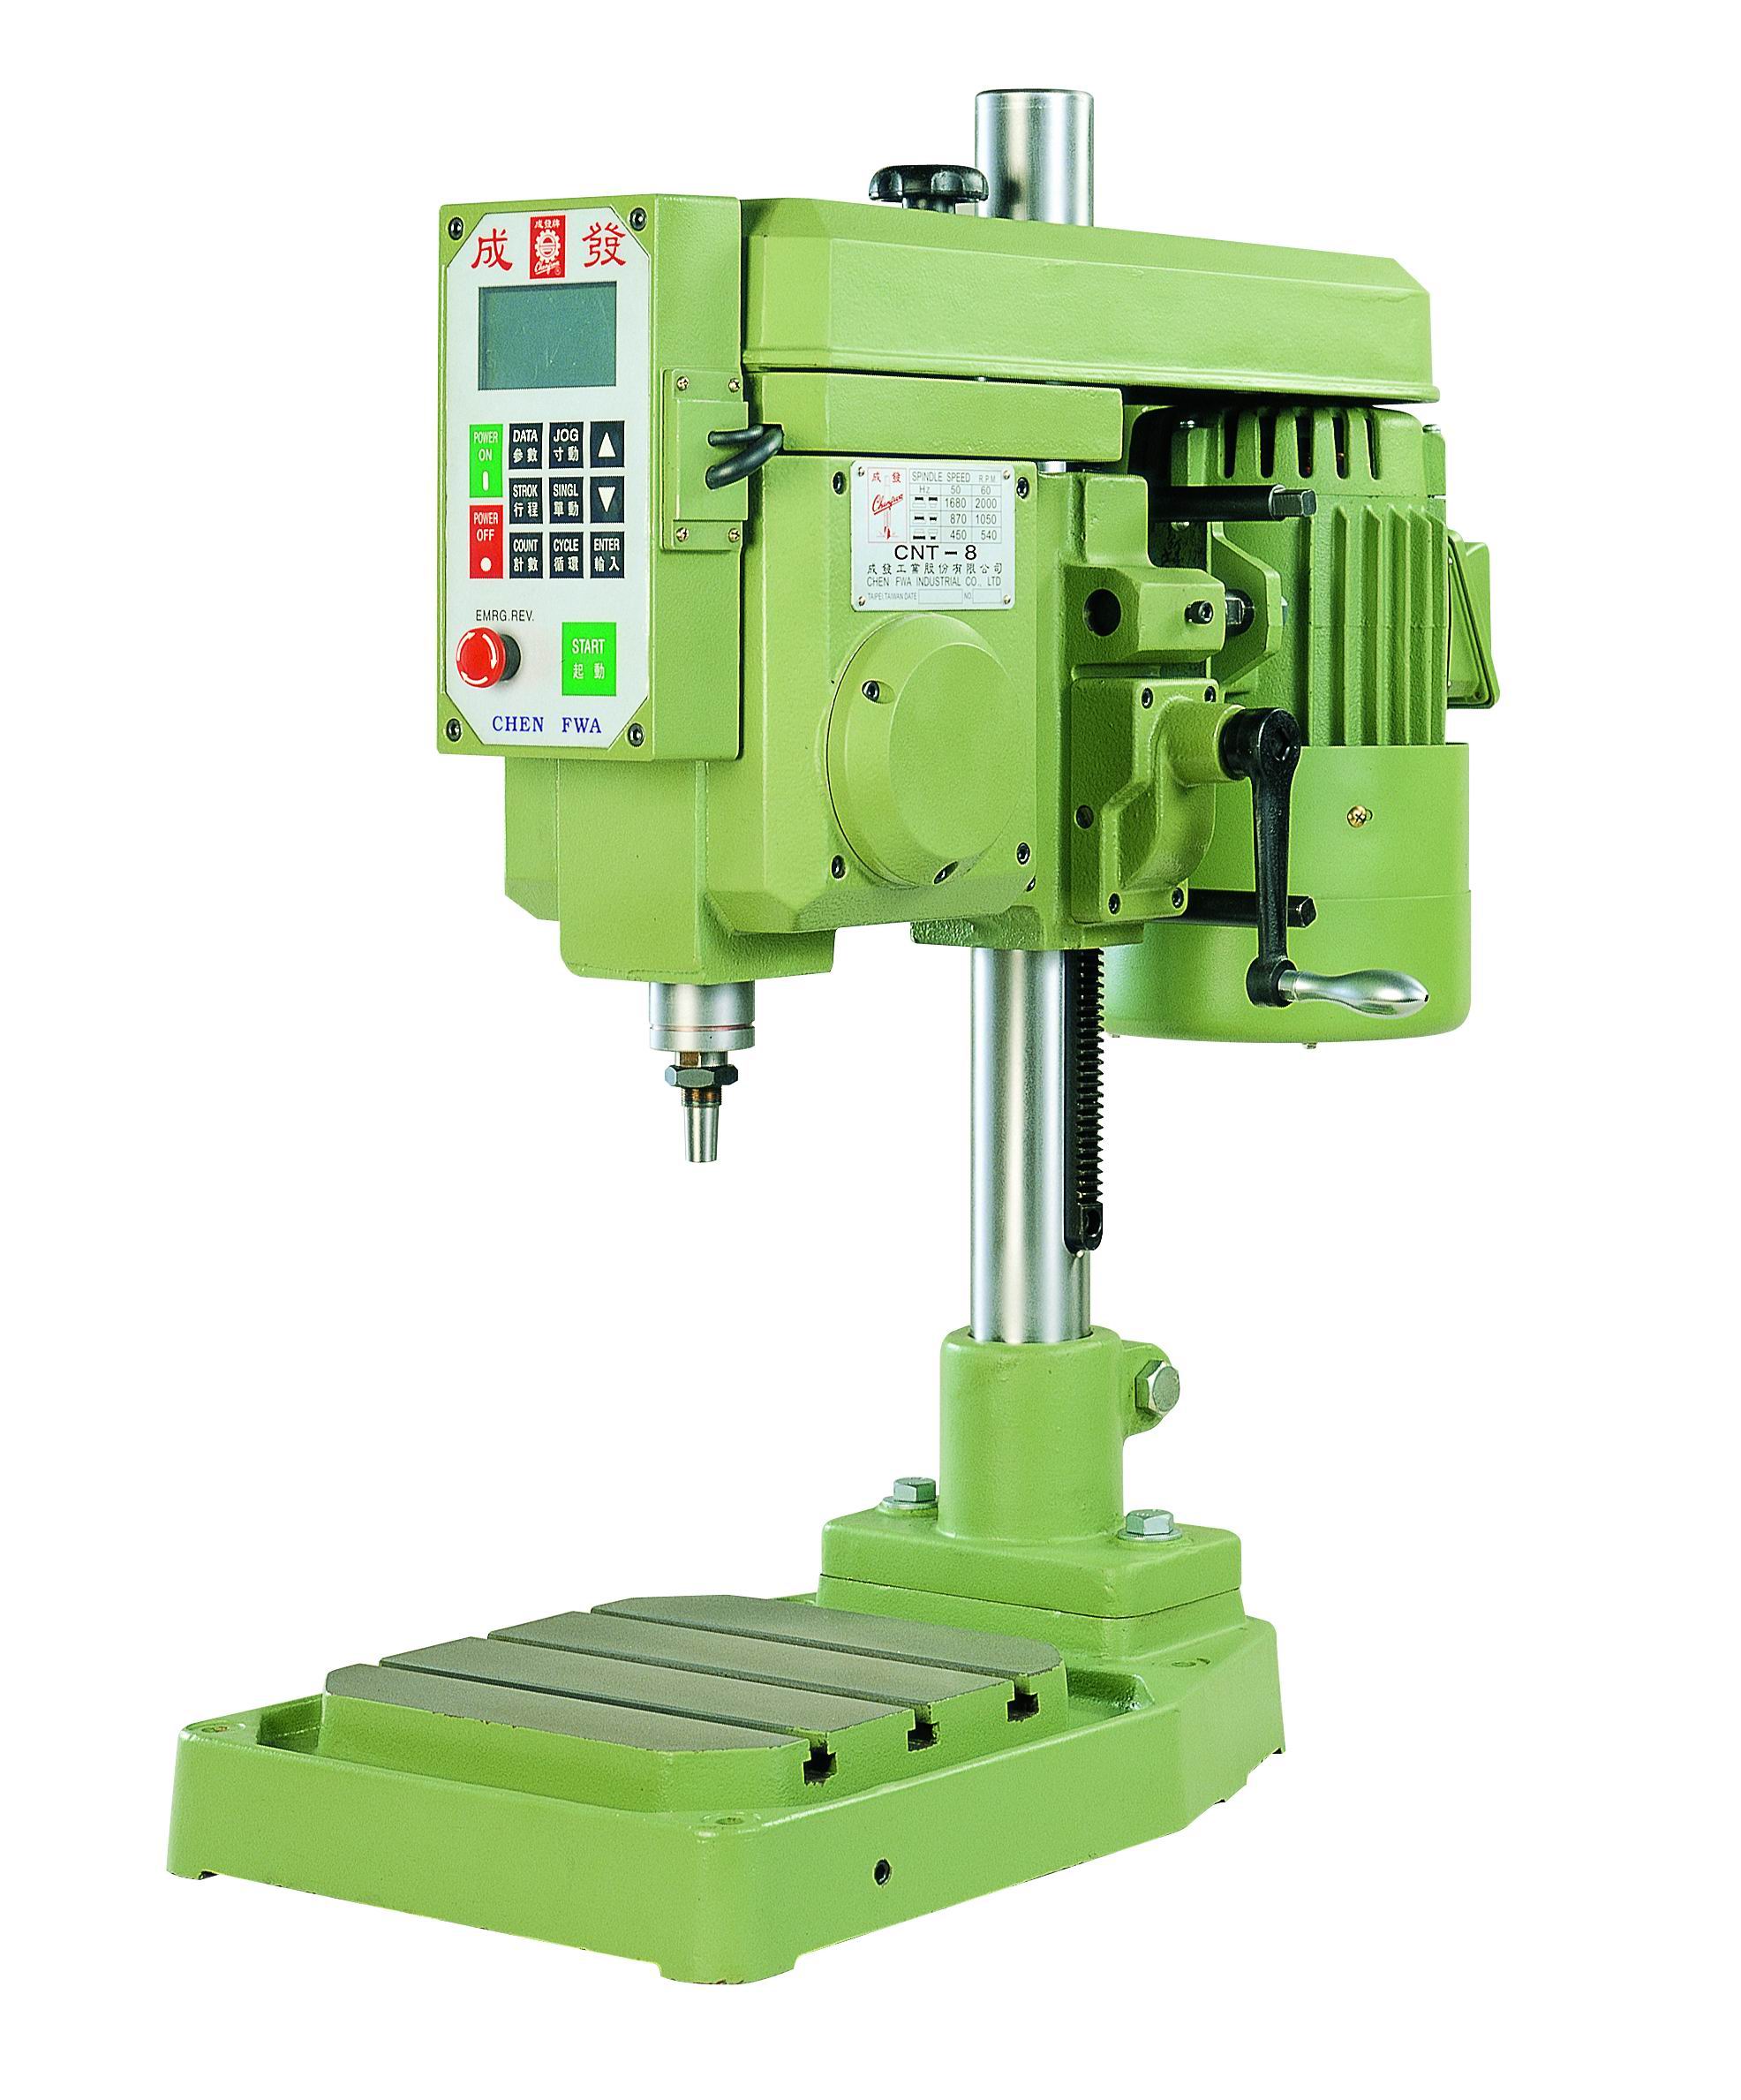 Numerical Control High Speed Auto Tapping Machine-CNT-8, CNT-8B